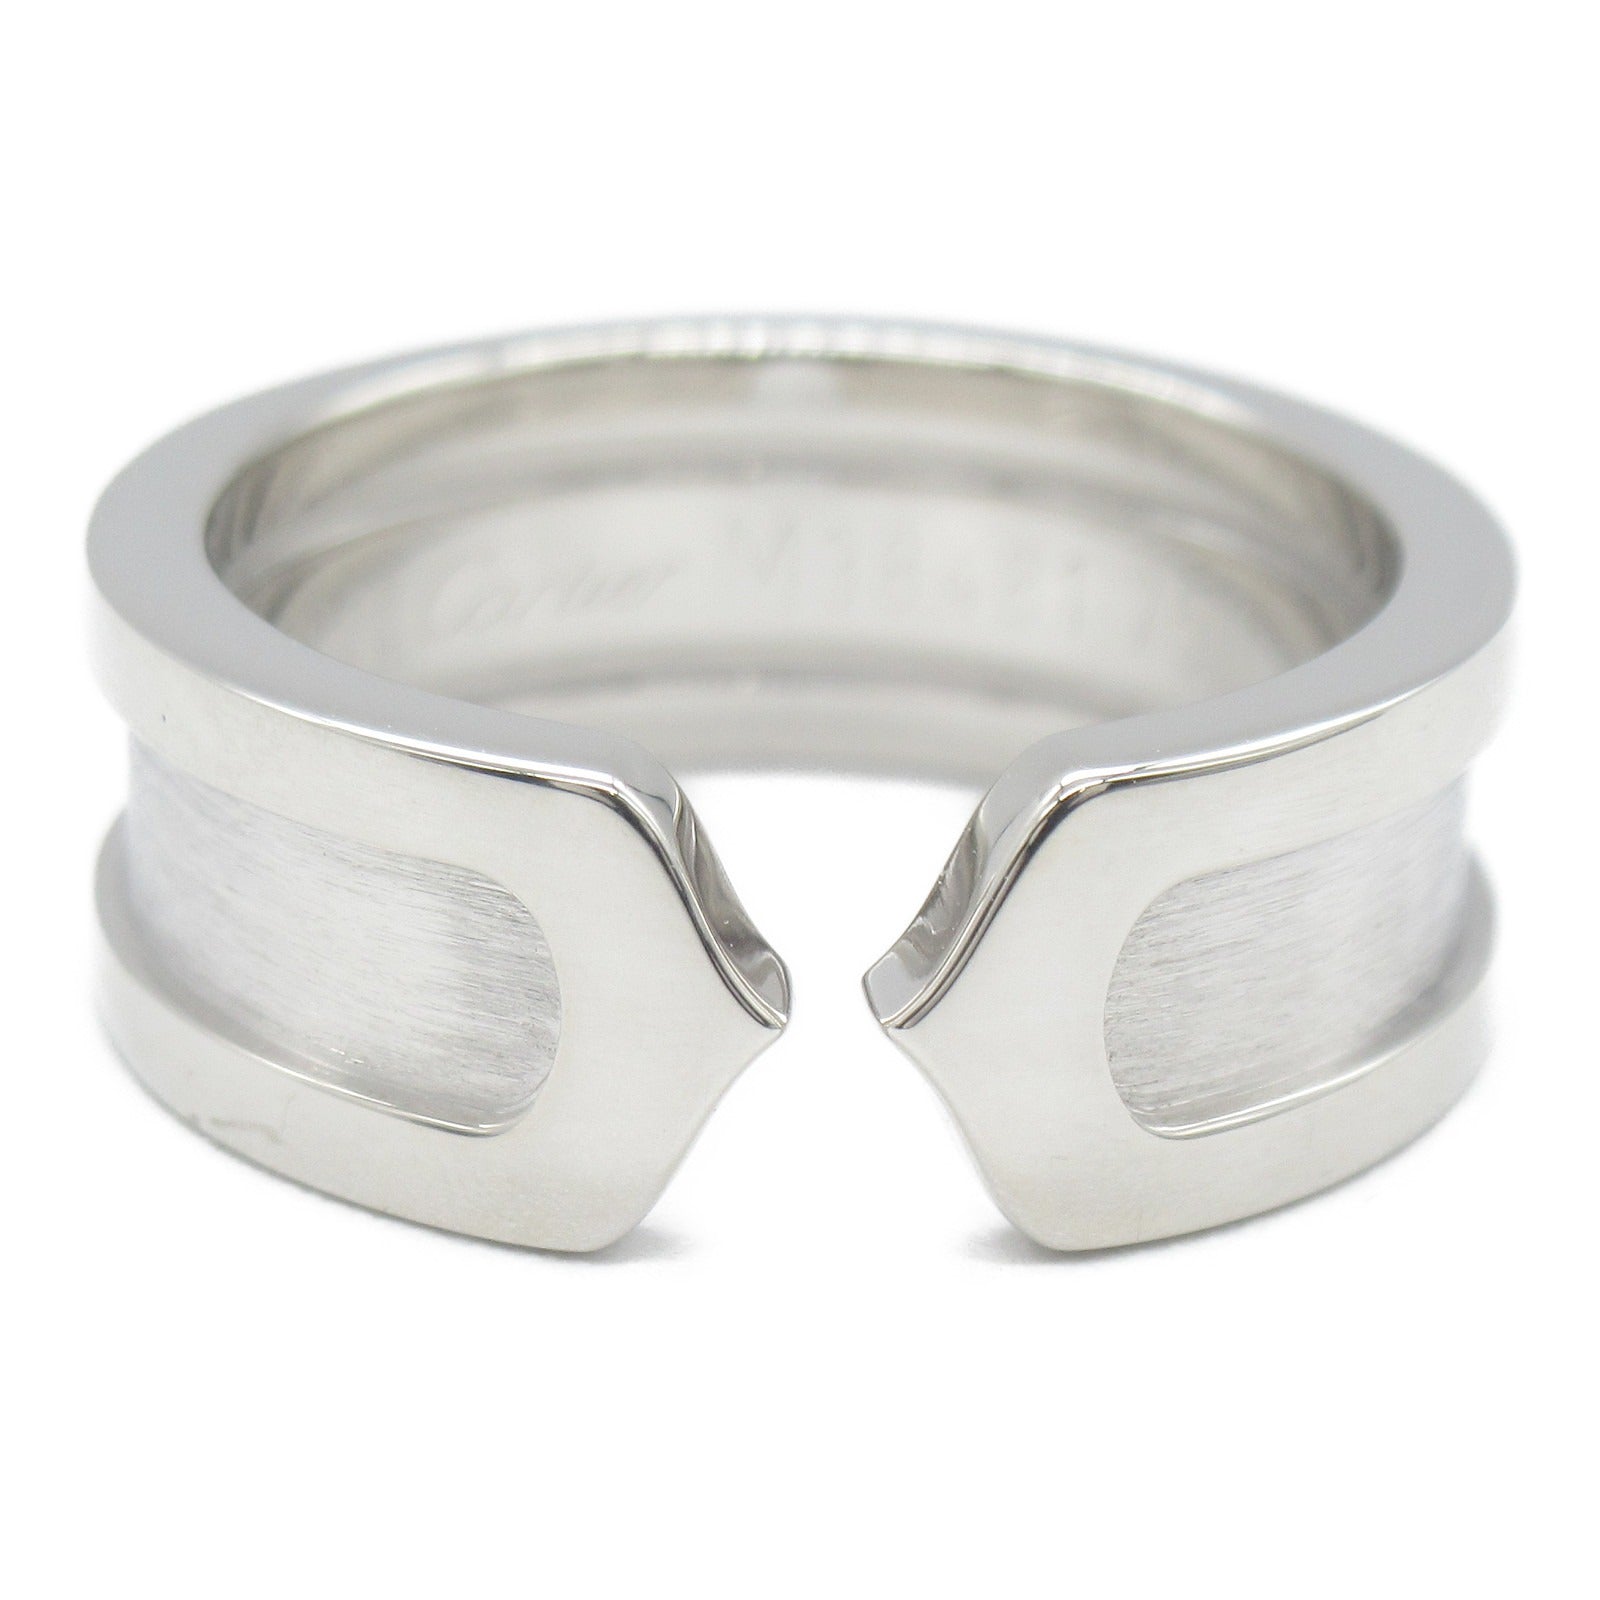 Cartier C2 Ring Ring and Ring Jewelry K18WG (White G)  Silver